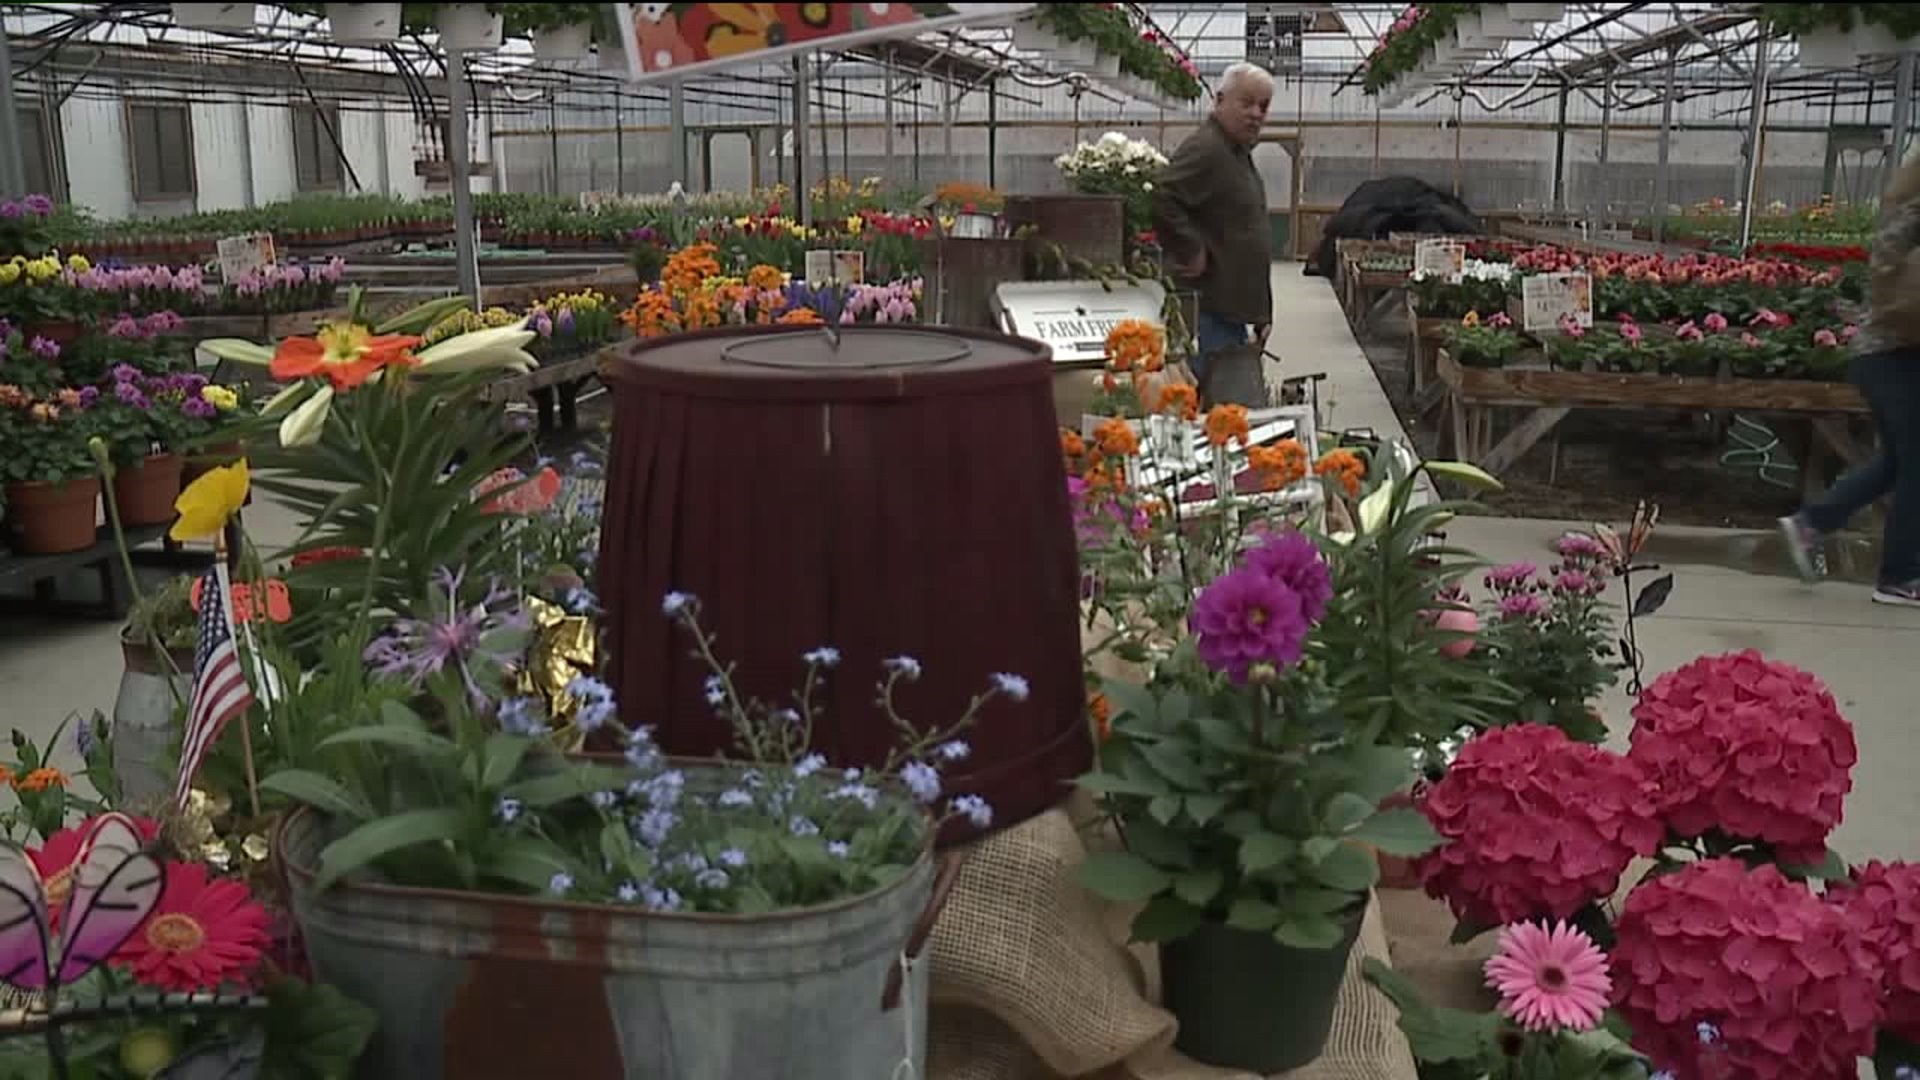 Local Greenhouse Opens for the Season